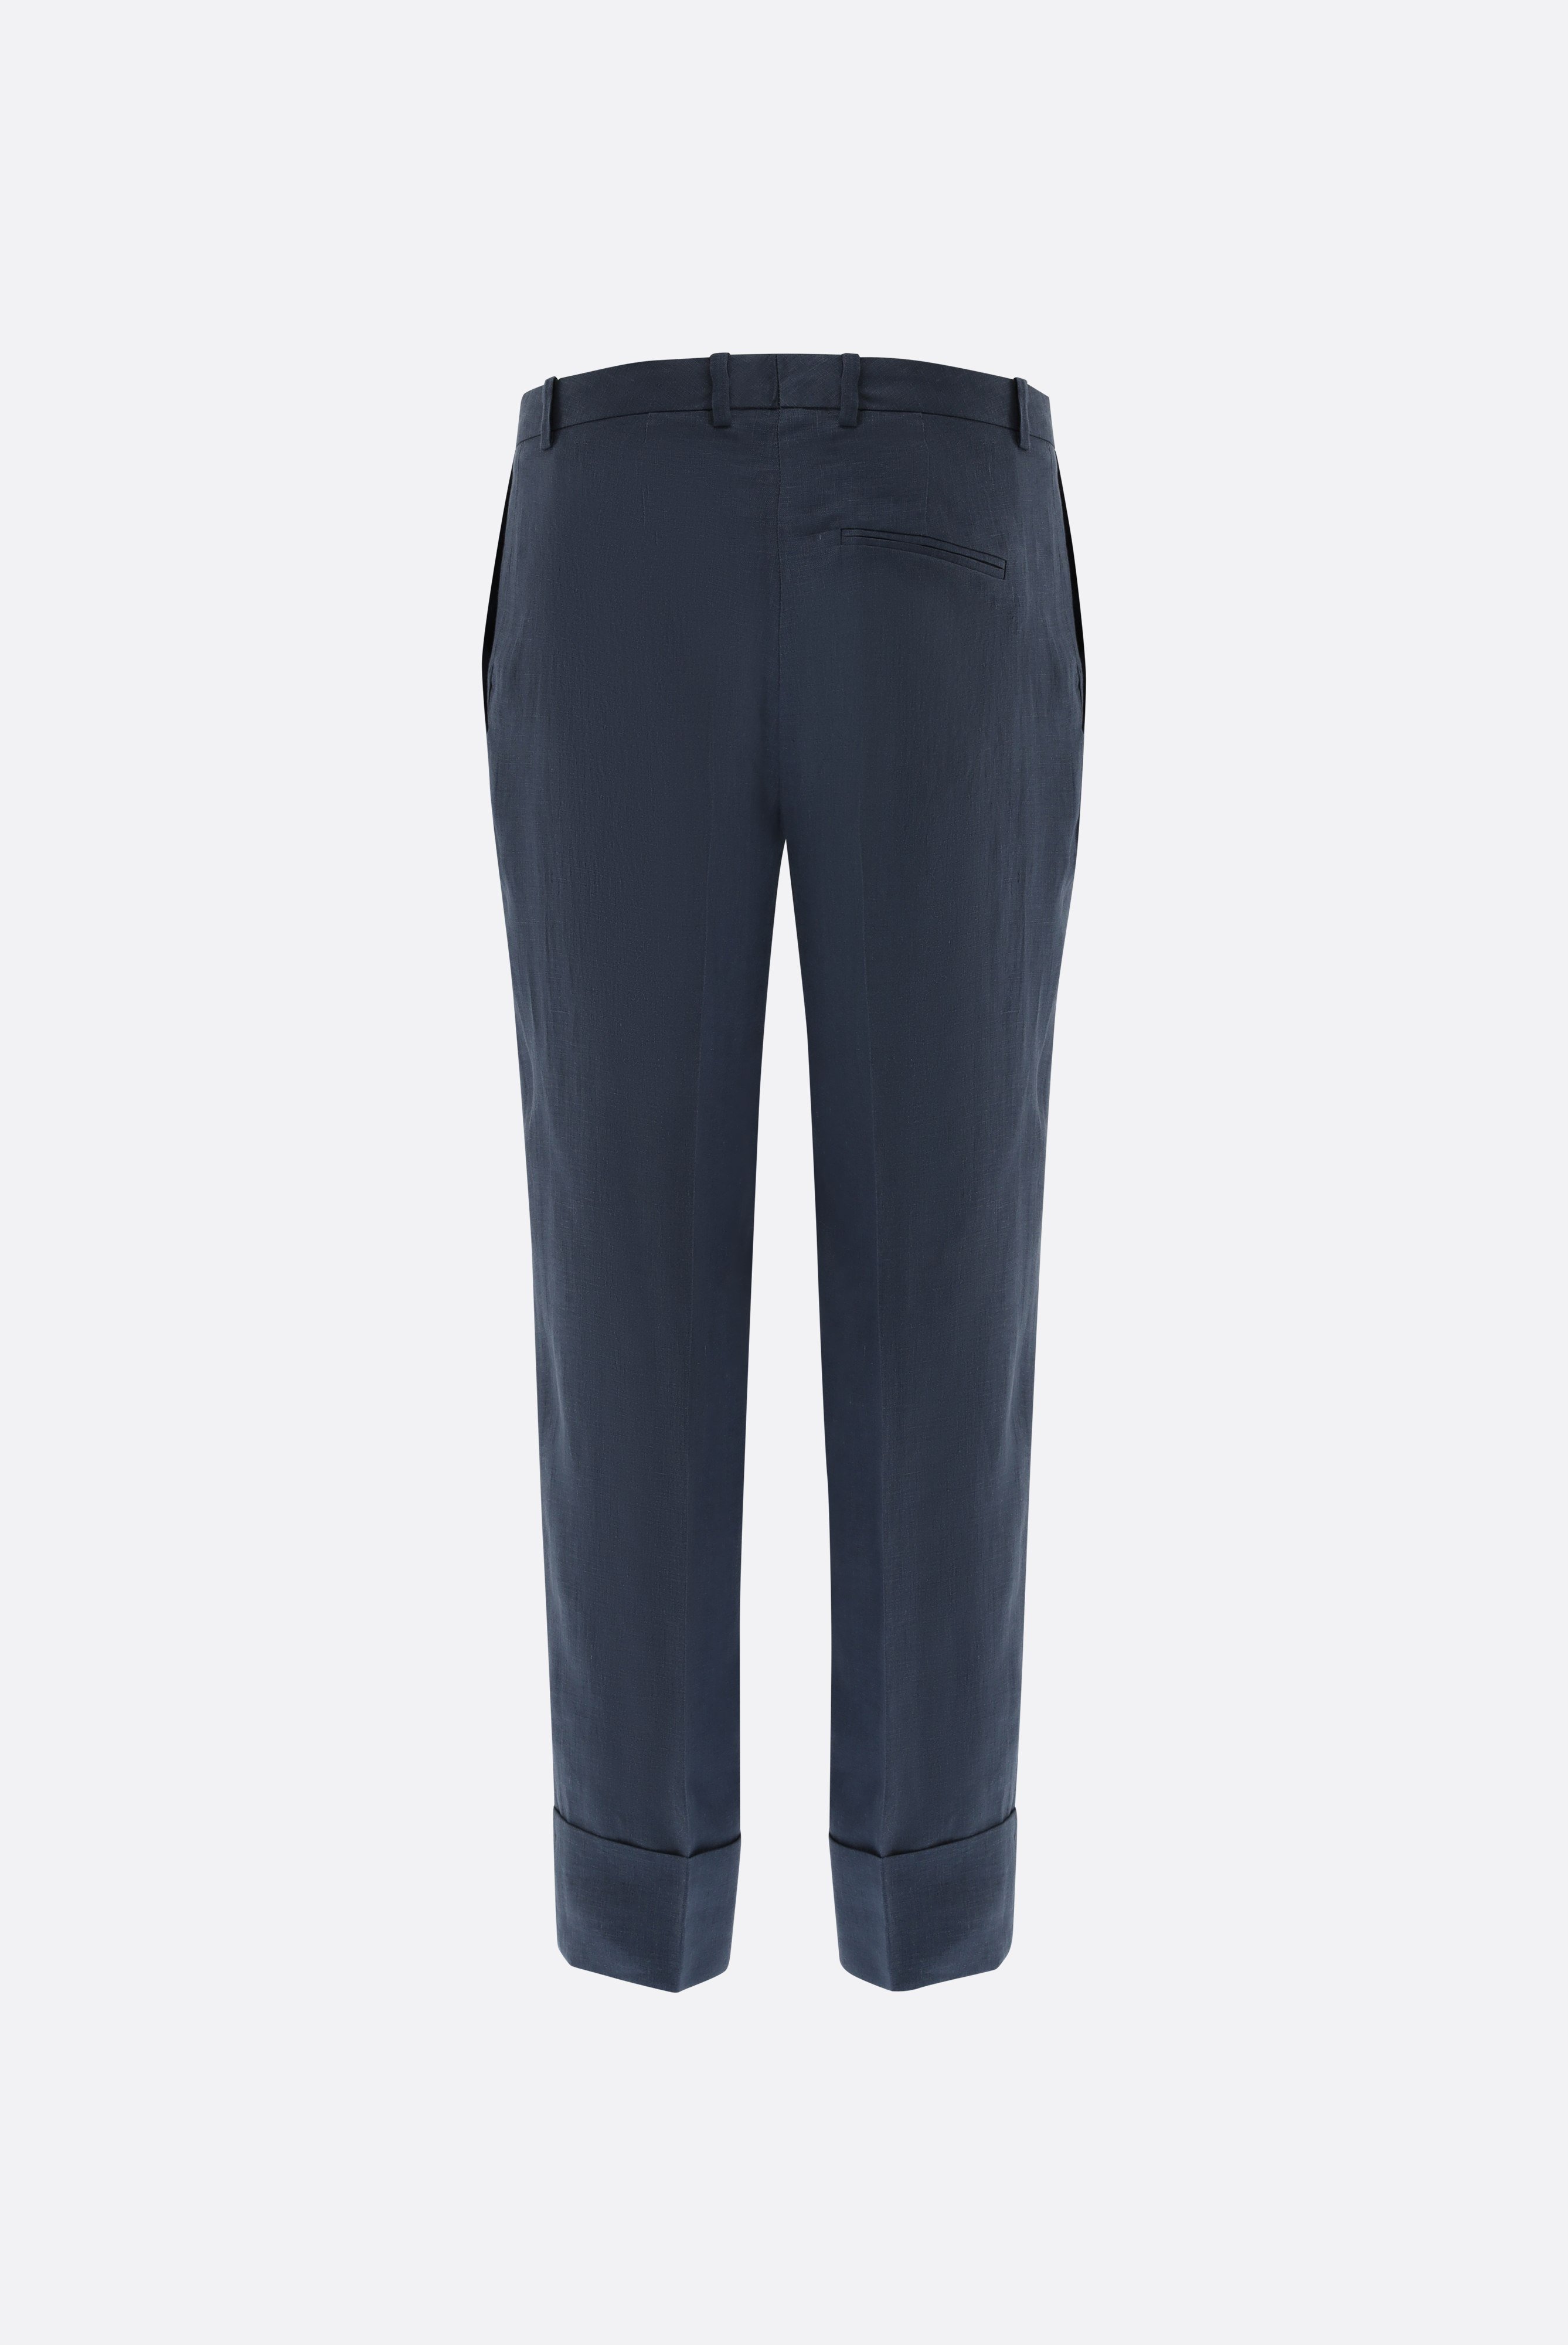 Jeans & Trousers+Linen Pants with Cuff+05.657V..H50555.785.36